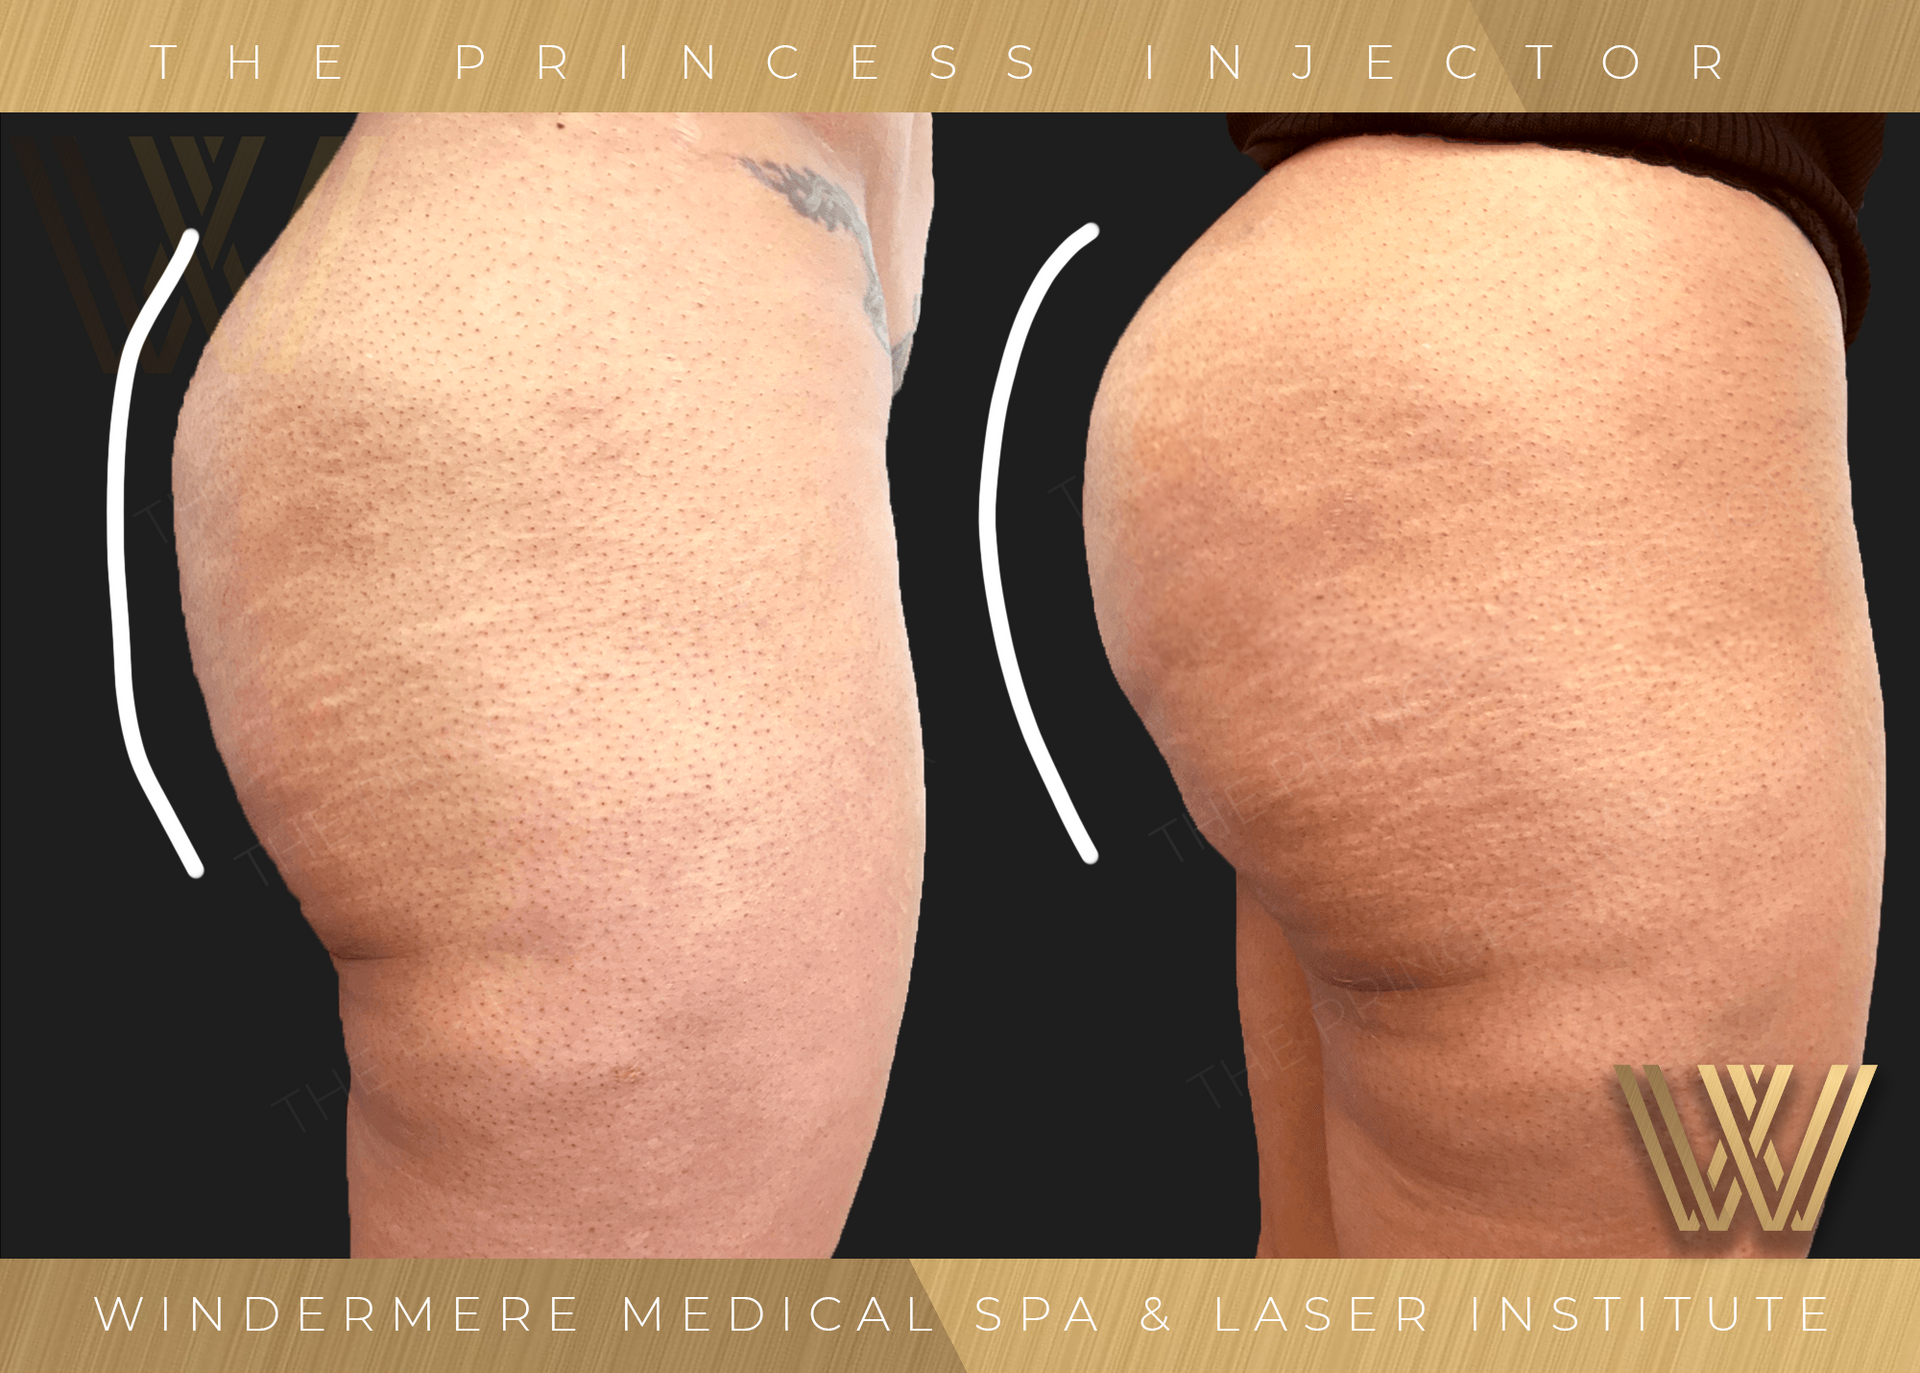 Comparison of pre-treatment and post-treatment outcomes following Sculptra Butt Lift at Windermere Medical Spa & Laser Institute, highlighting noticeable lift, contour refinement, and skin texture enhancement